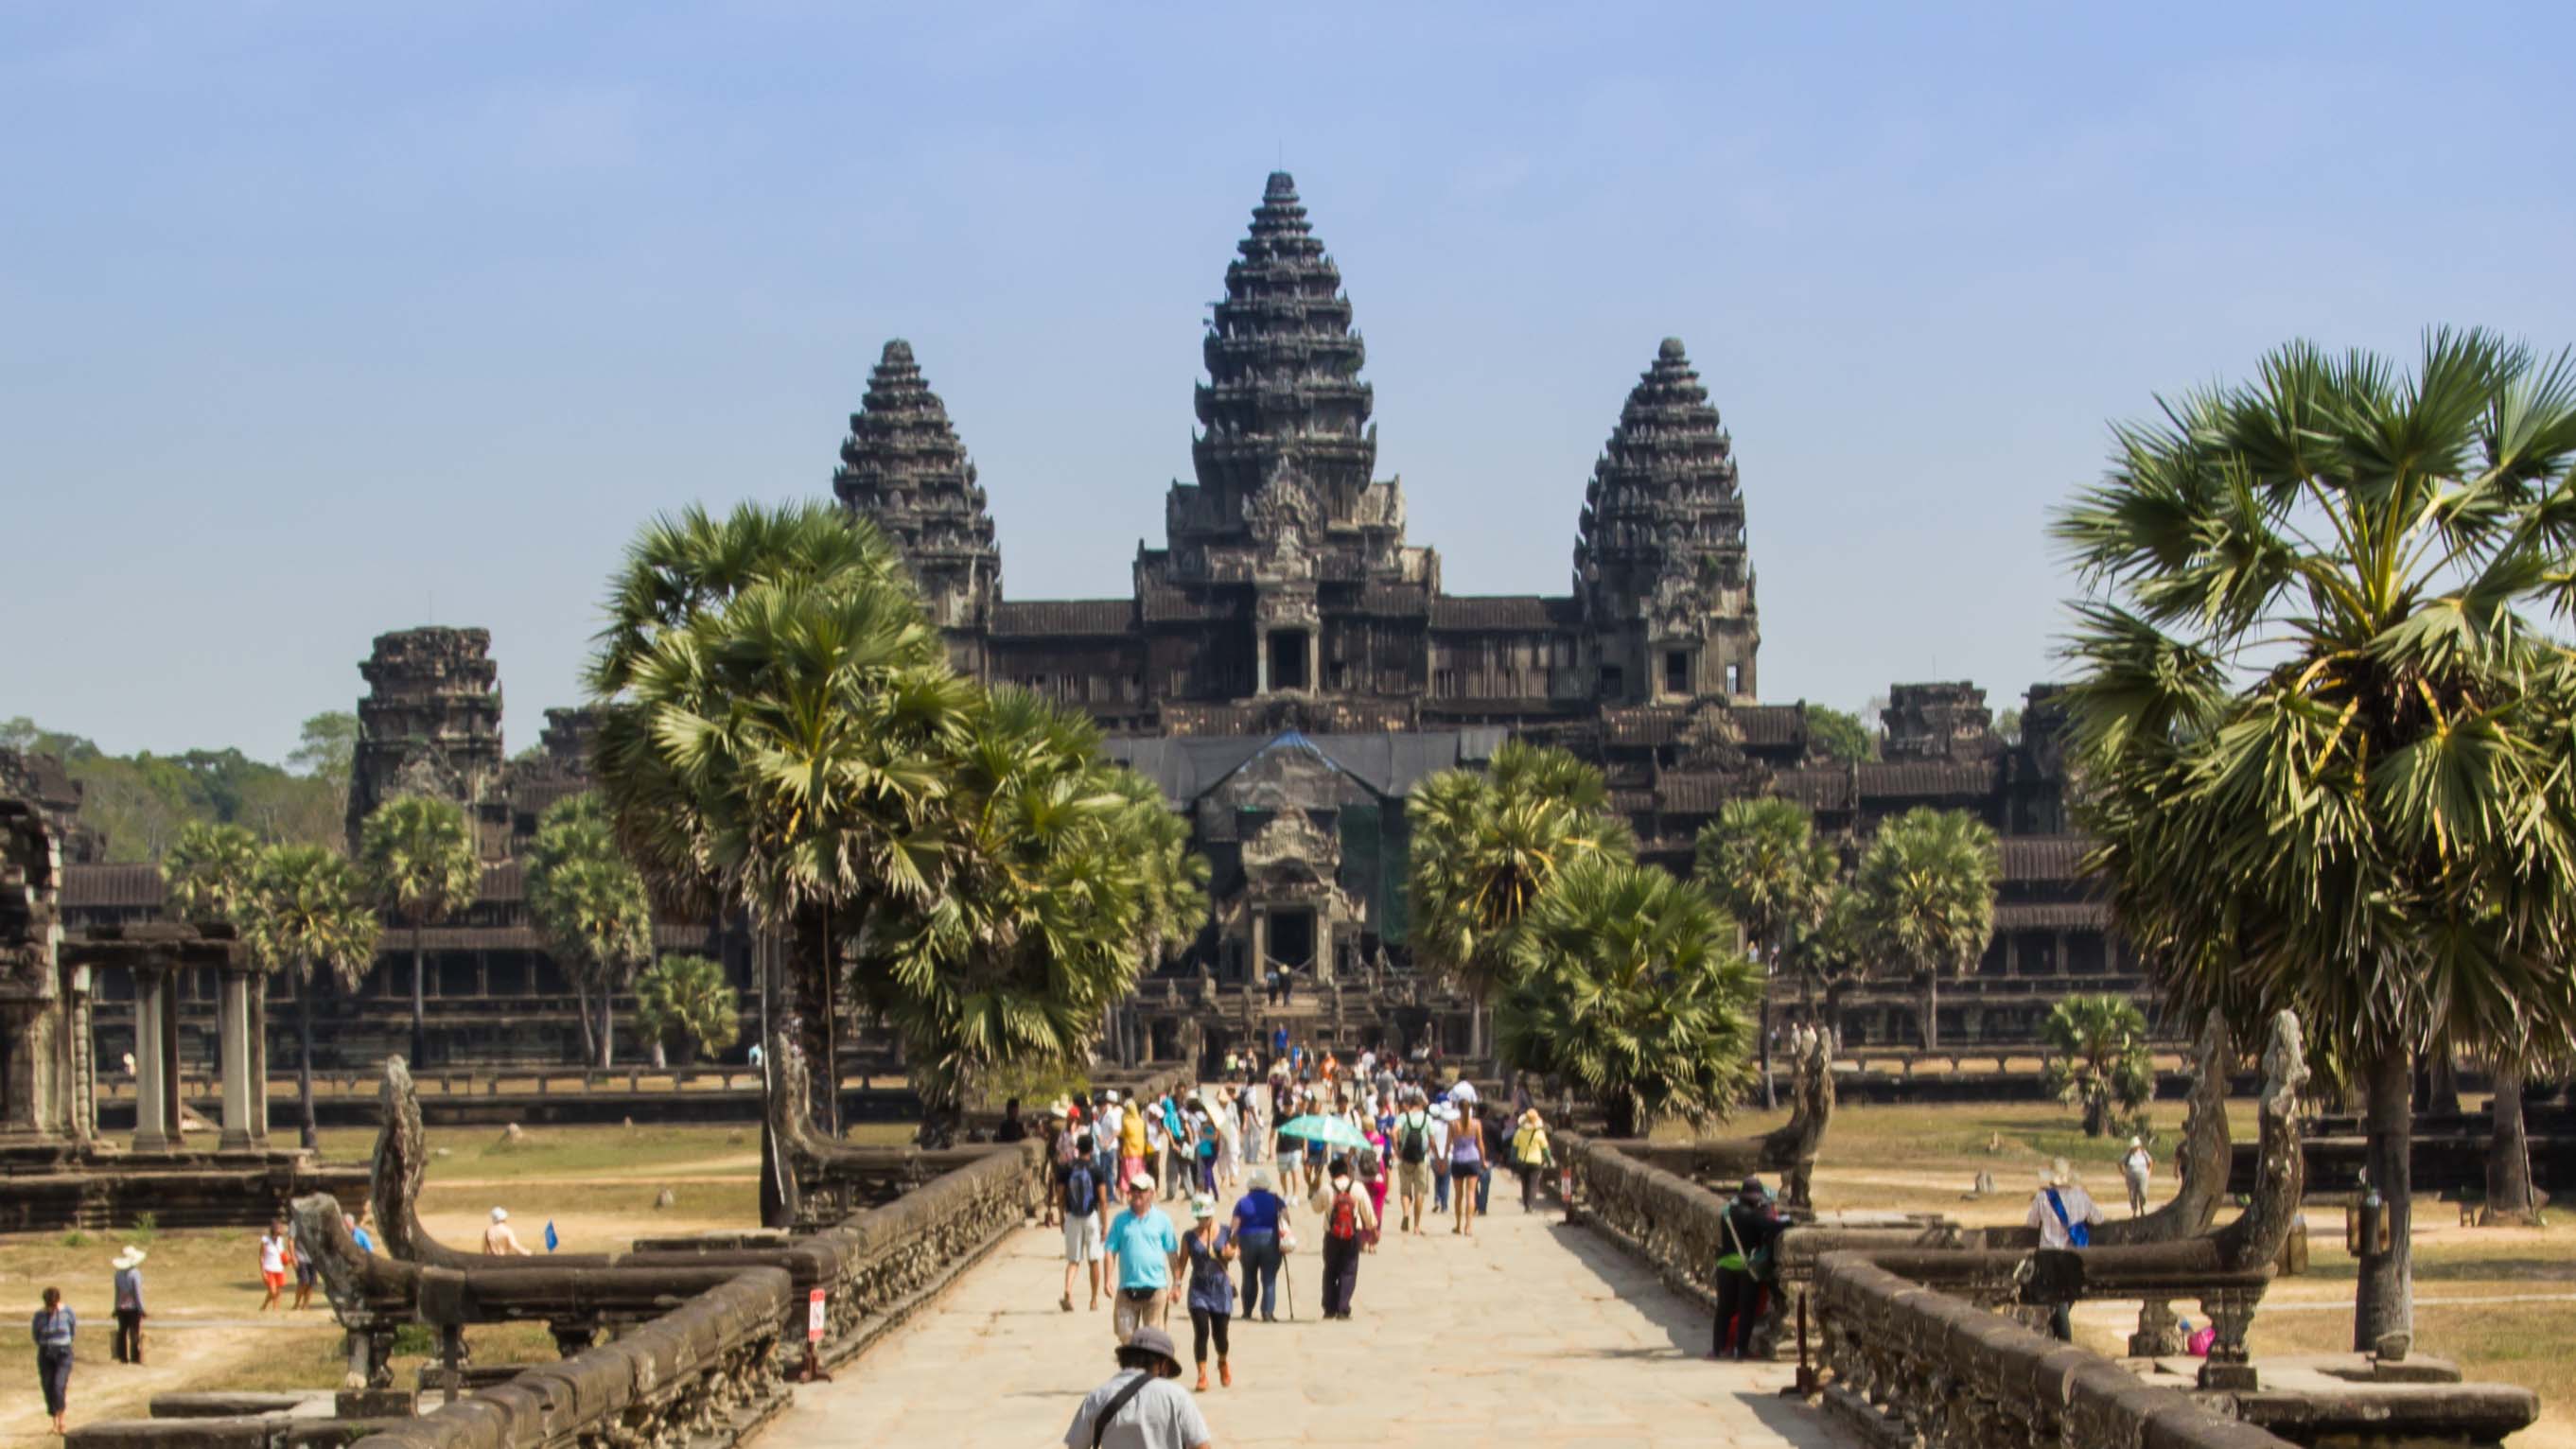 As we walked through the Angkor Temples, we were always 